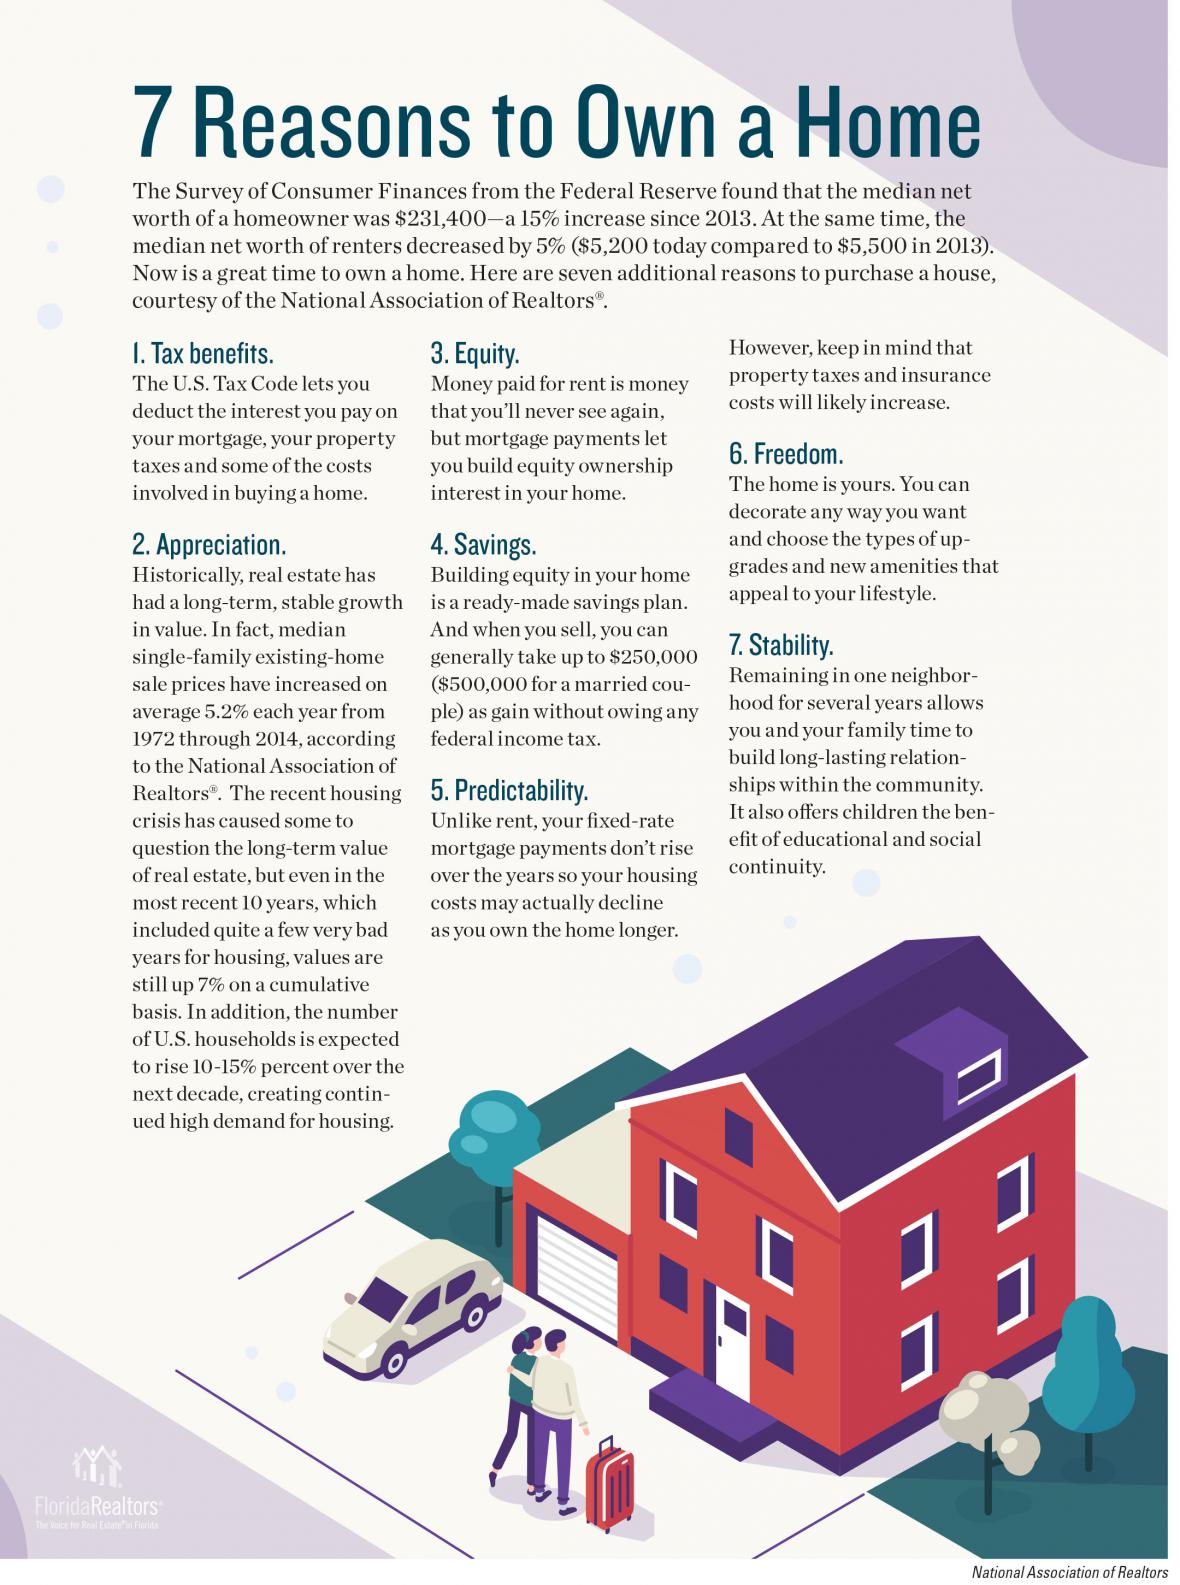 7 Reasons to Own a Home